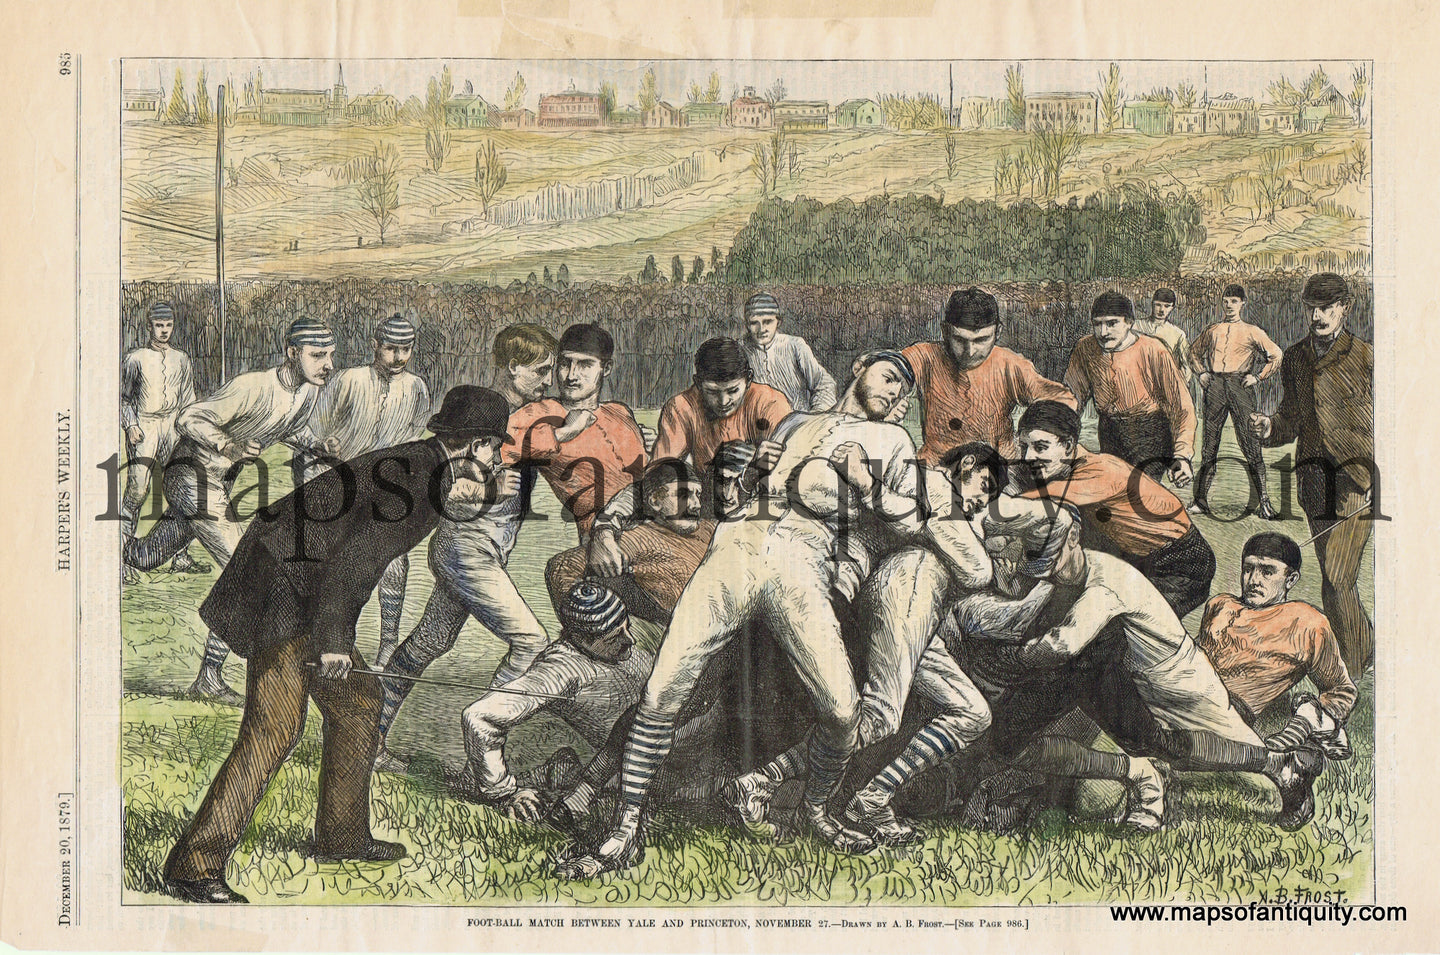 Hand-Colored-Antique-Print-Foot-ball-Match-between-Yale-and-Princeton-November-27.-**********-College-Northeast-Colleges-1879-Harper's-Weekly-Maps-Of-Antiquity